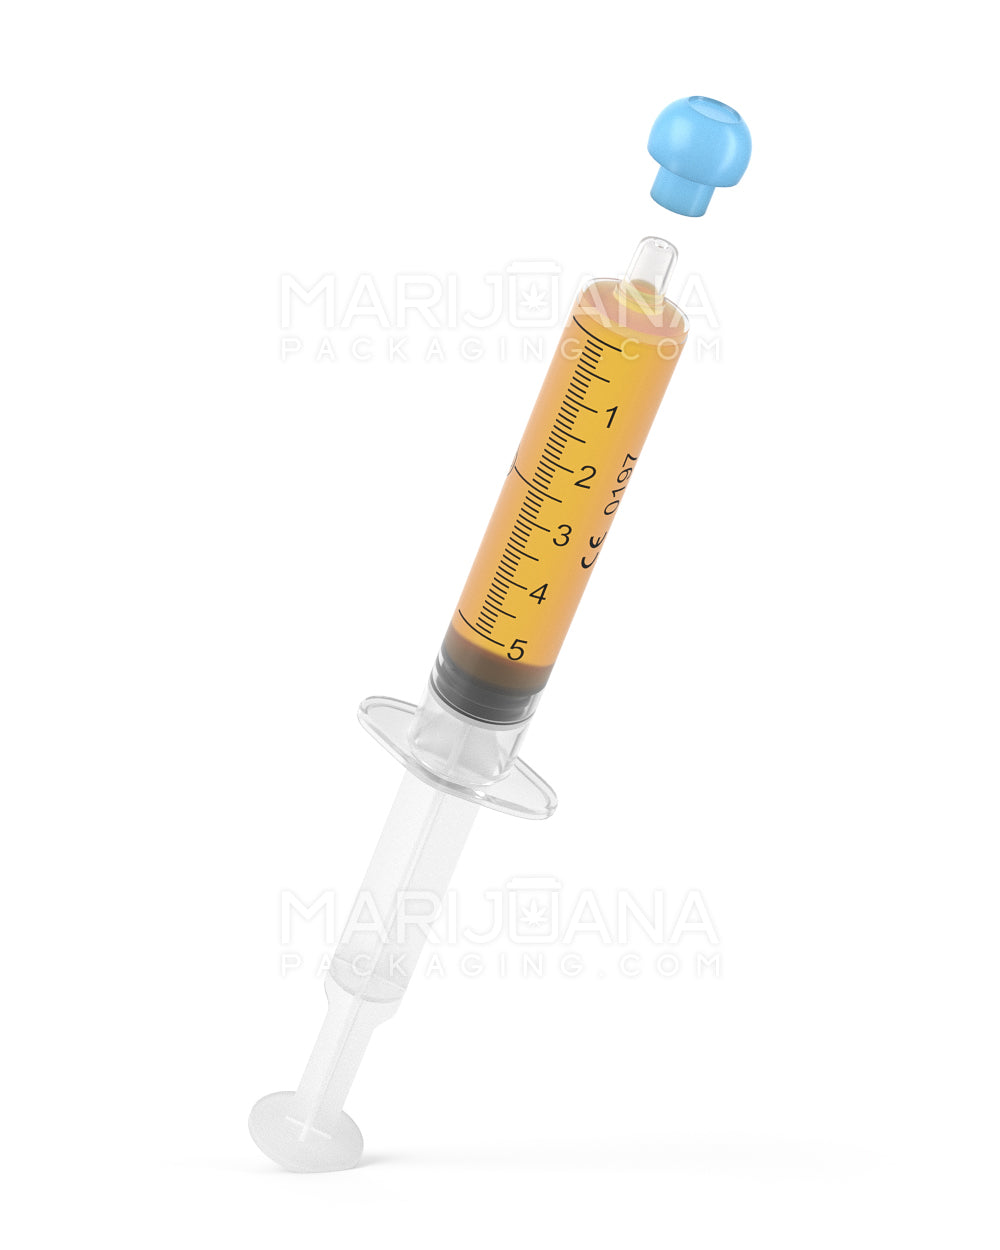 Plastic Oral Concentrate Syringes | 5mL - 1mL Increments - 100 Count - 6